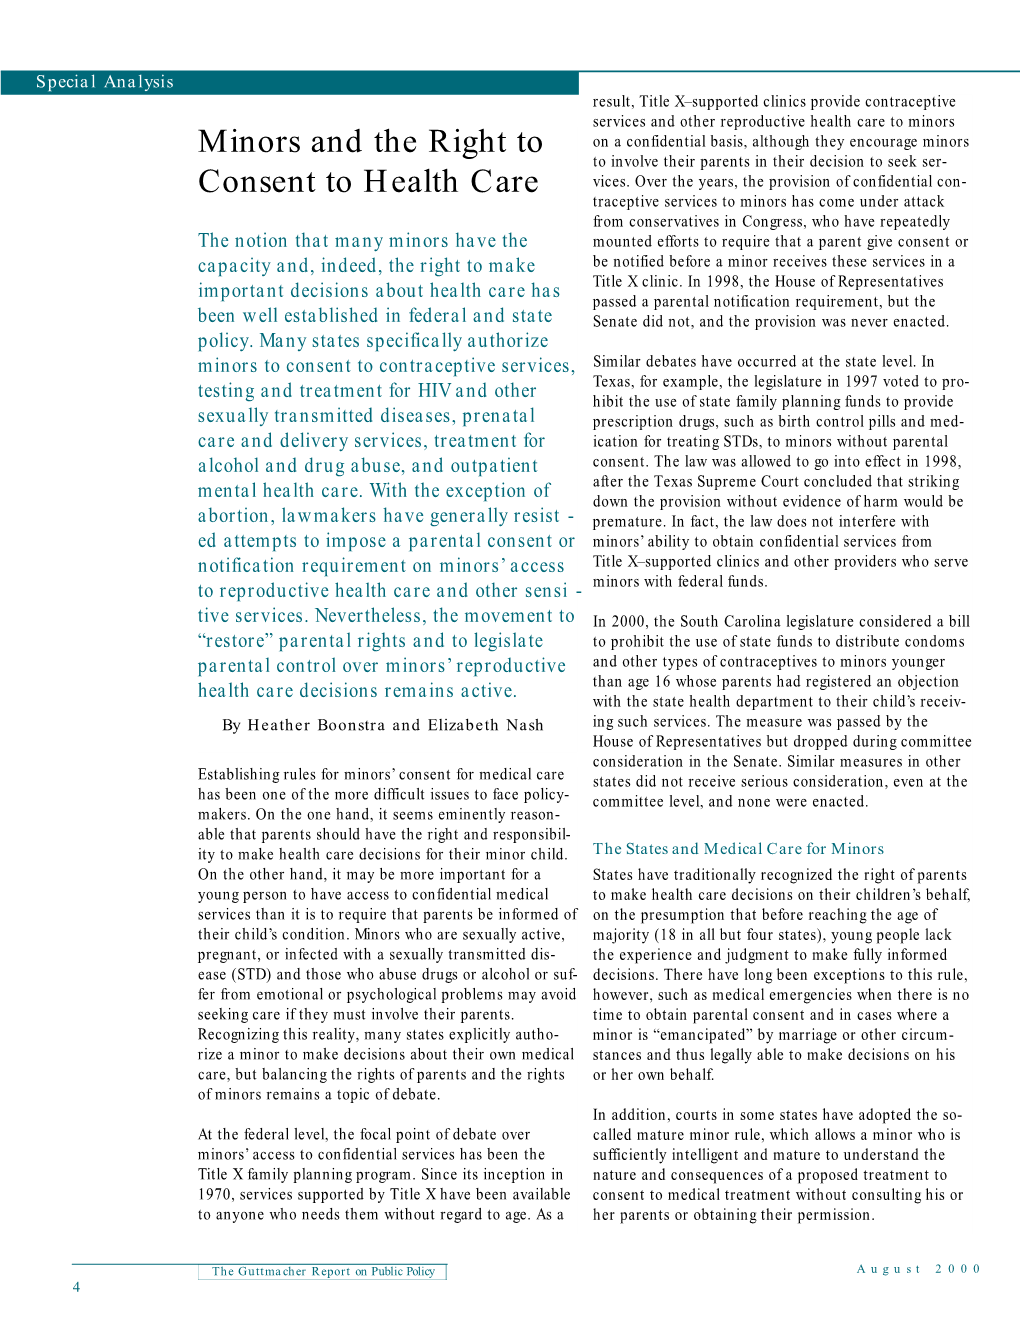 Minor's and the Right to Consent to Health Care